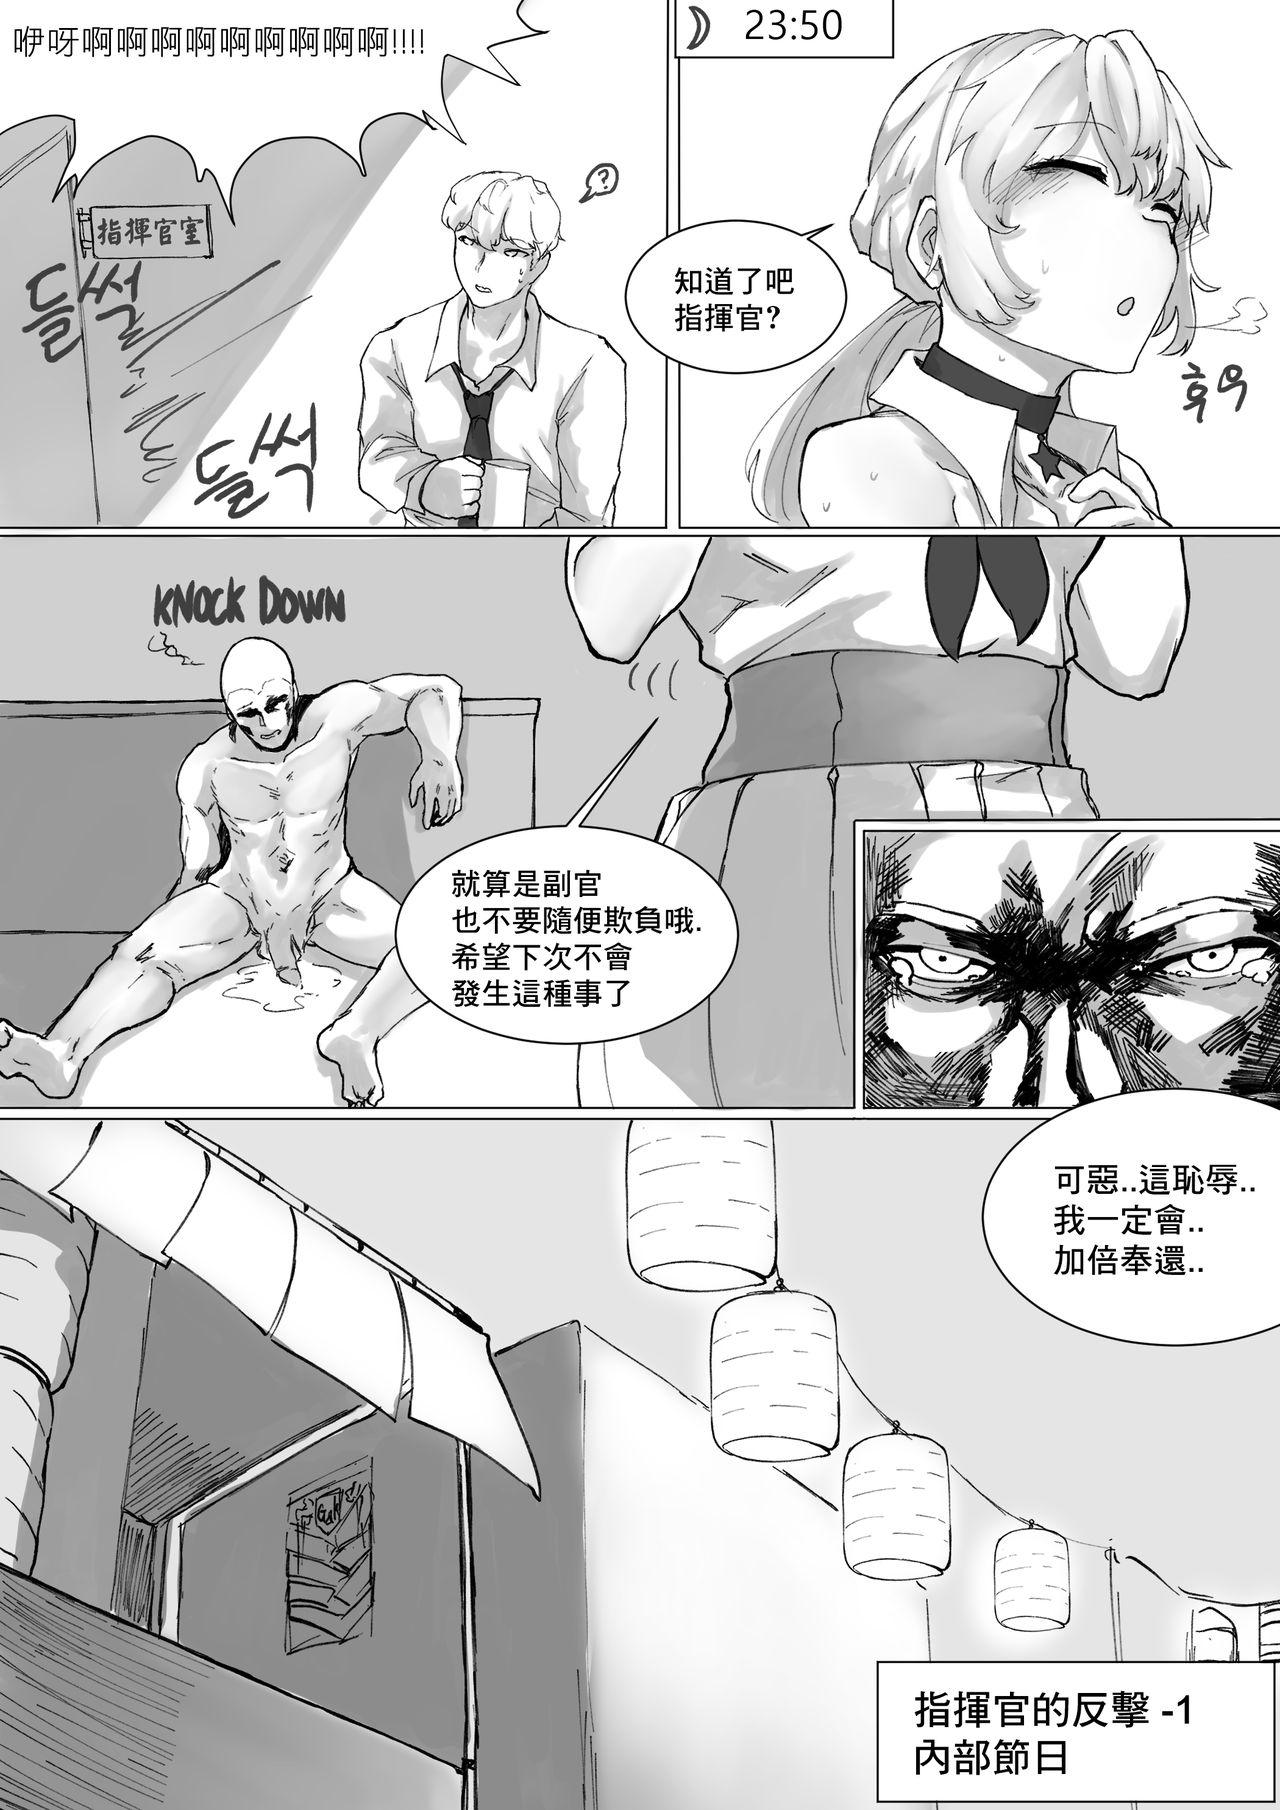 Office Fuck How To Use OTS-14 - Girls frontline Hot Naked Women - Page 9